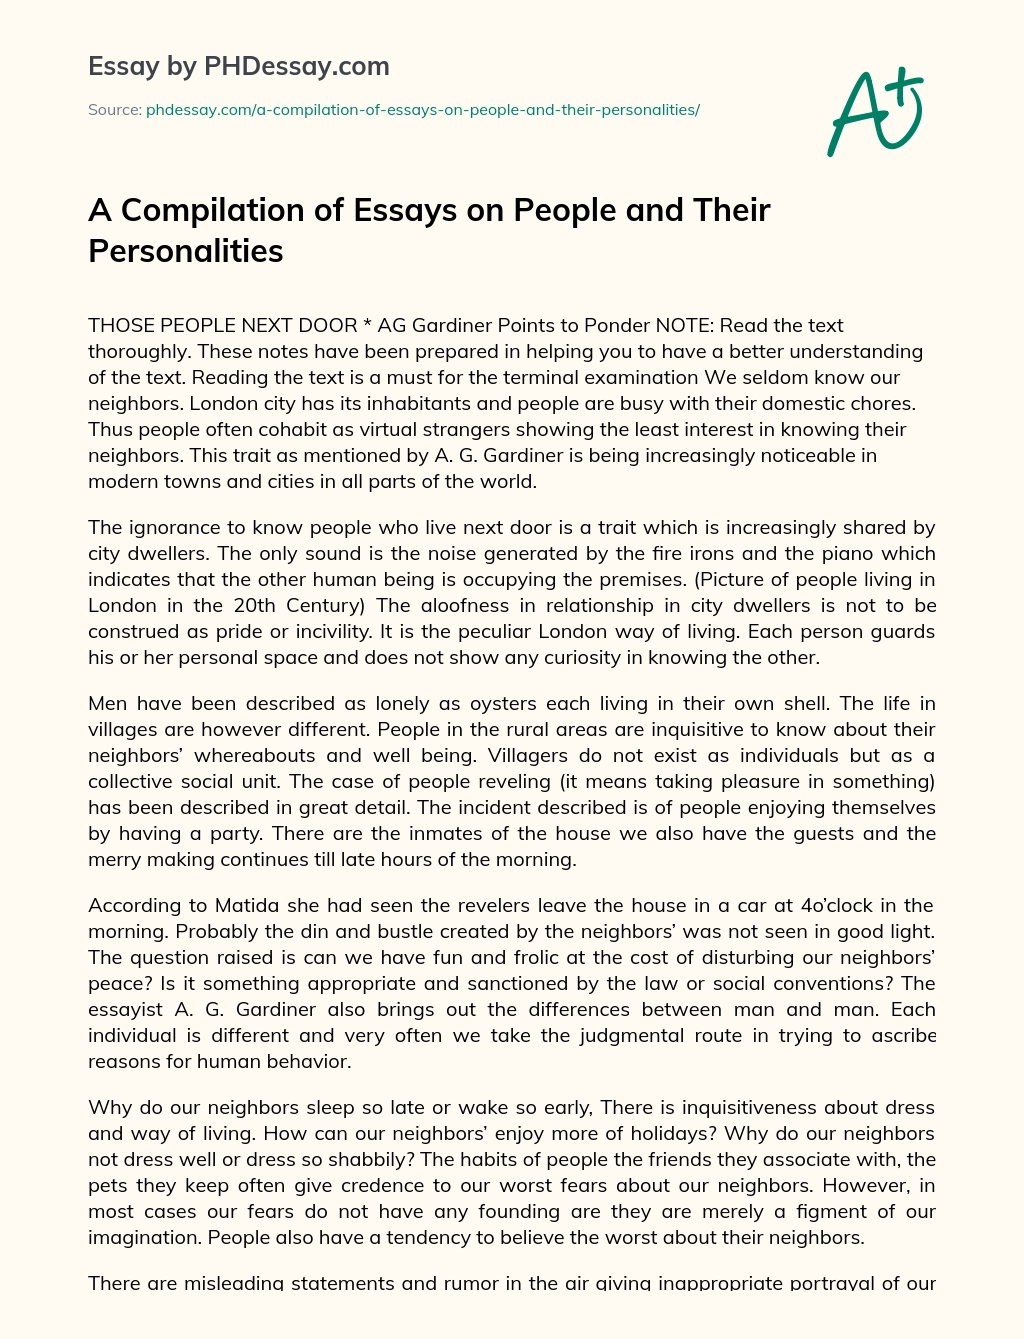 A Compilation of Essays on People and Their Personalities essay